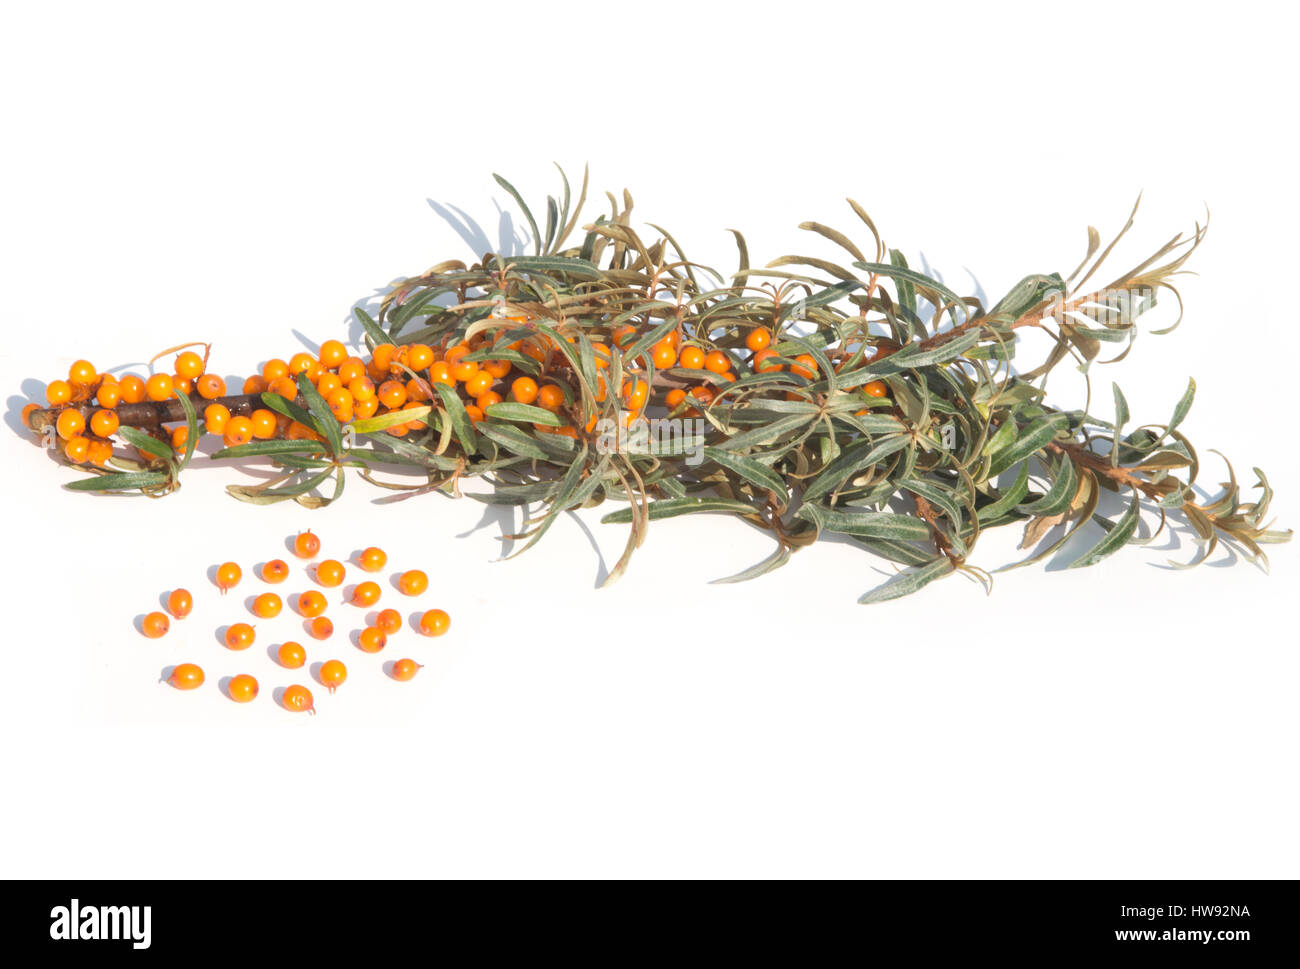 common sea buckthorn isolated on a white background Stock Photo